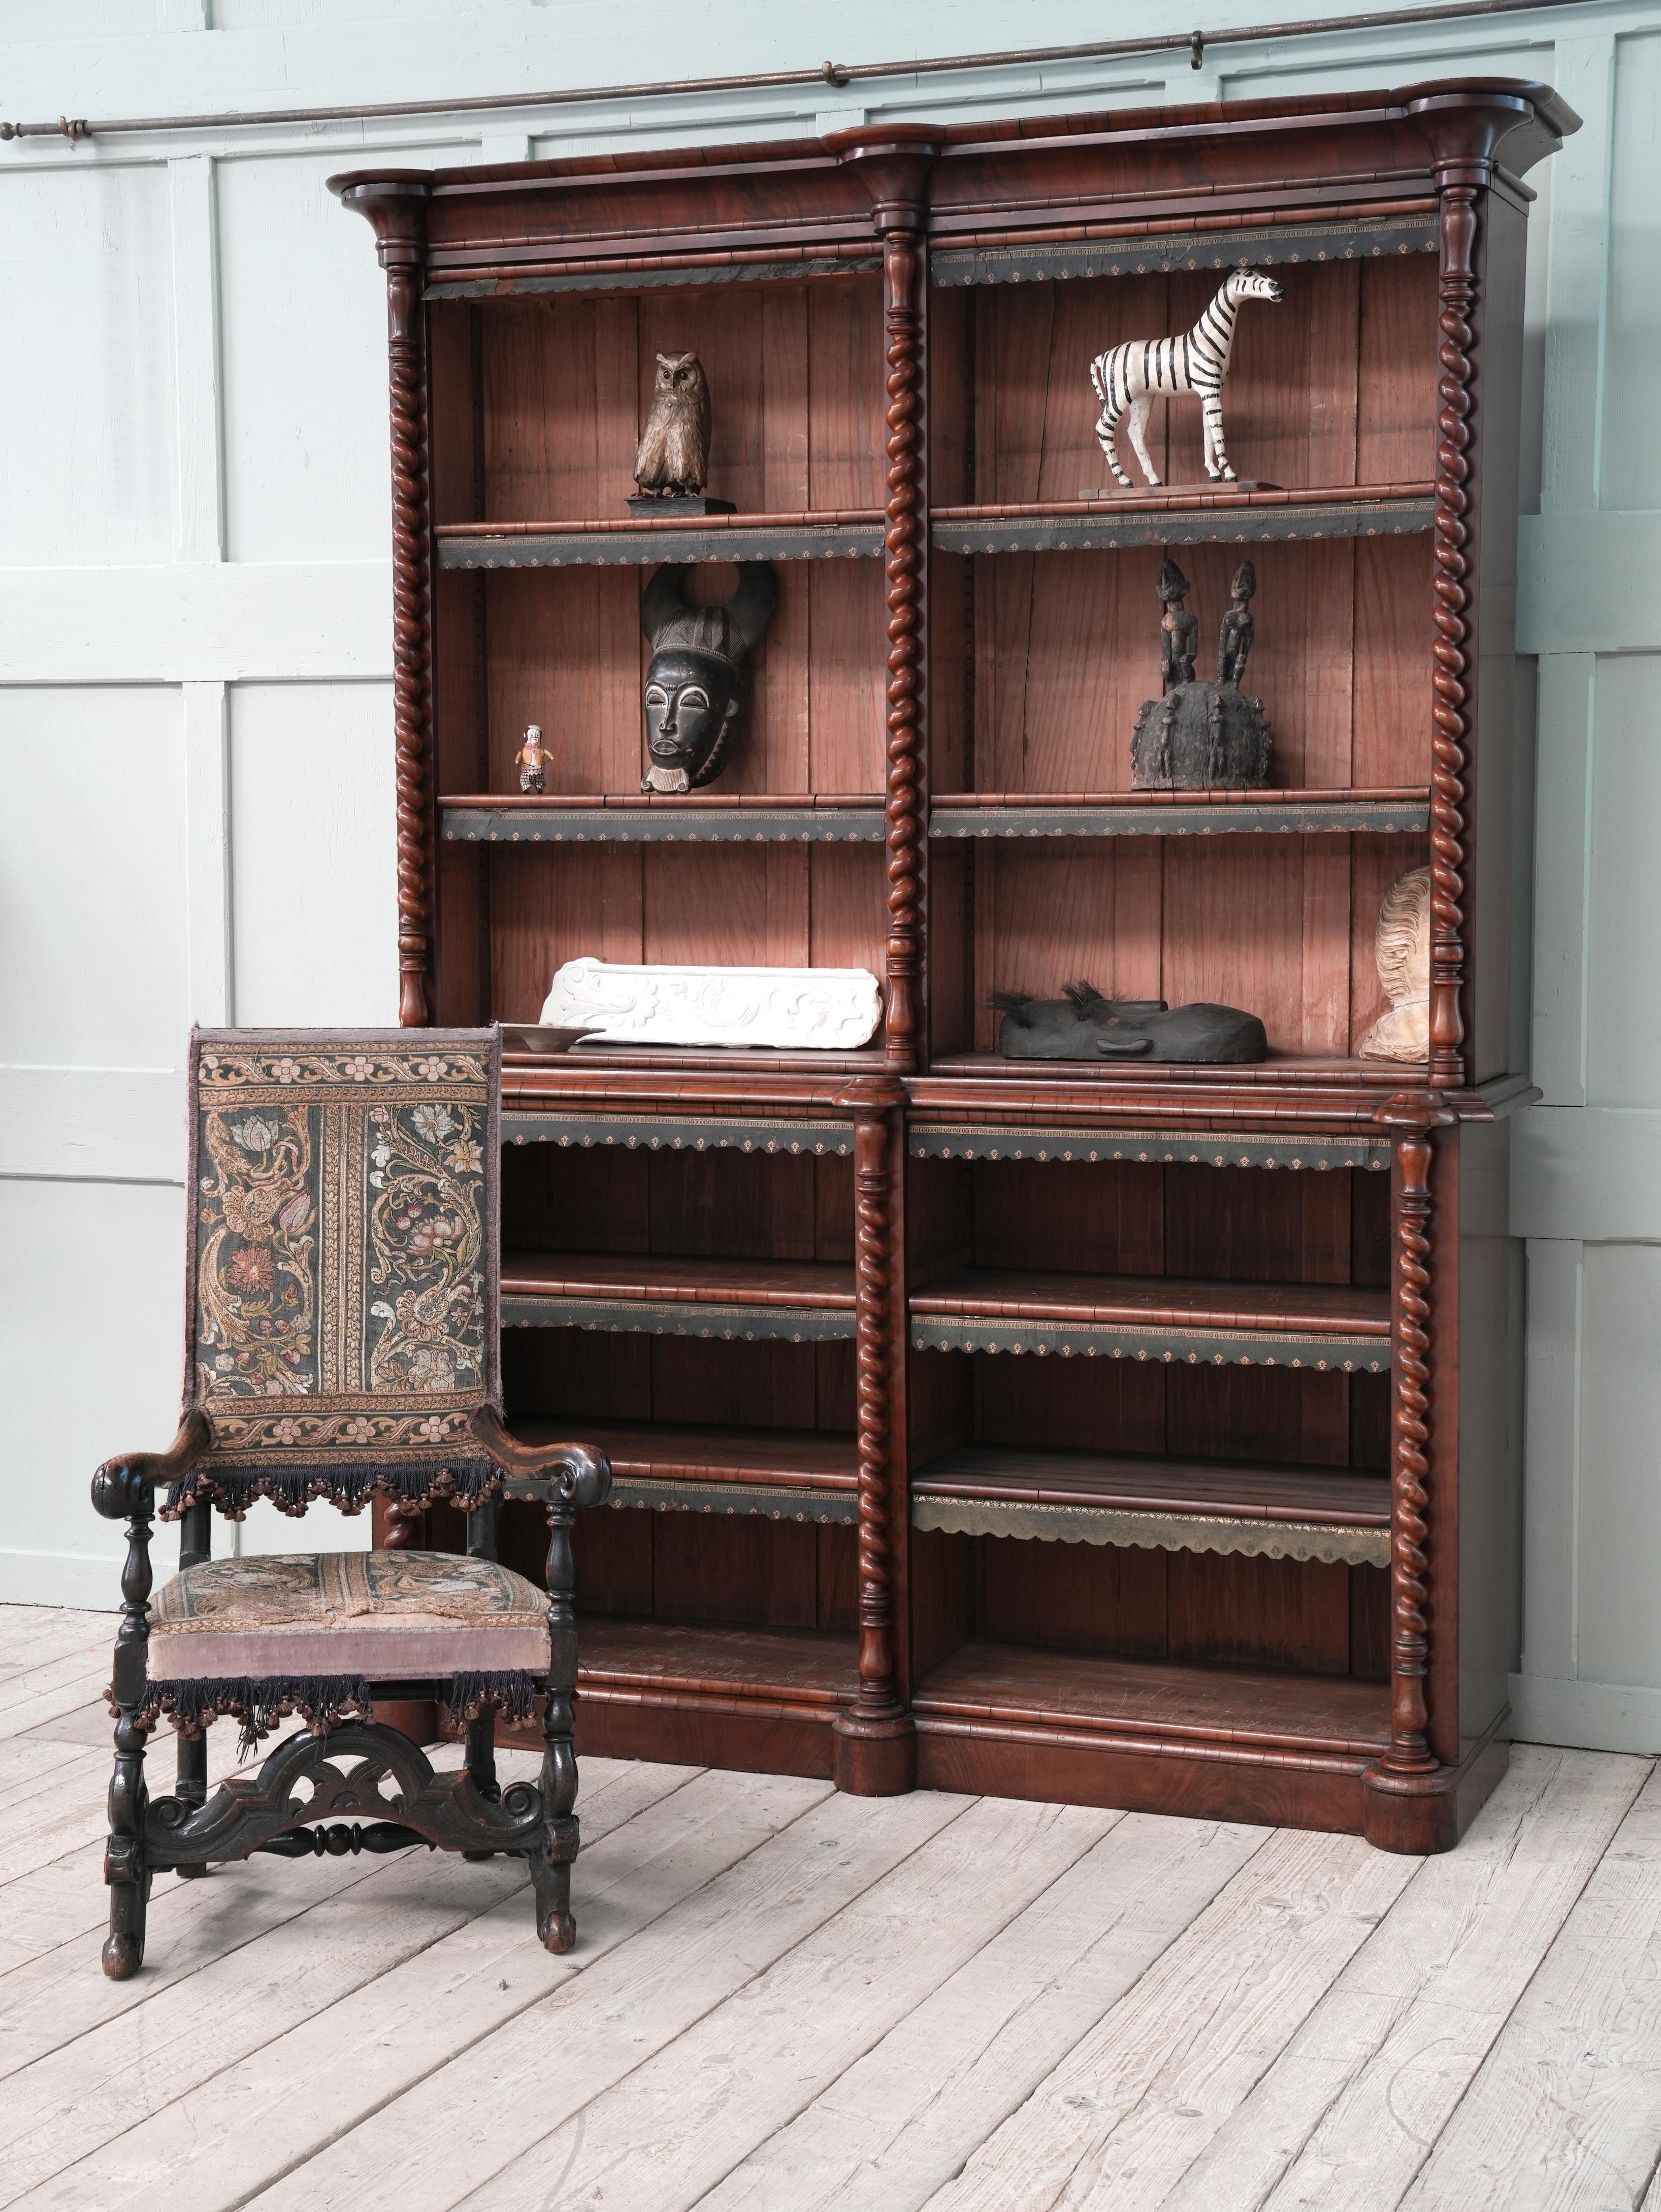 The shaped cornice above two open bays of adjustable shelves flanked and centred by barley twist turned uprights, the base has two adjustable shelves per bay, hinged timber dust covers with tooled leather coverings, raised on a shaped plinth base.